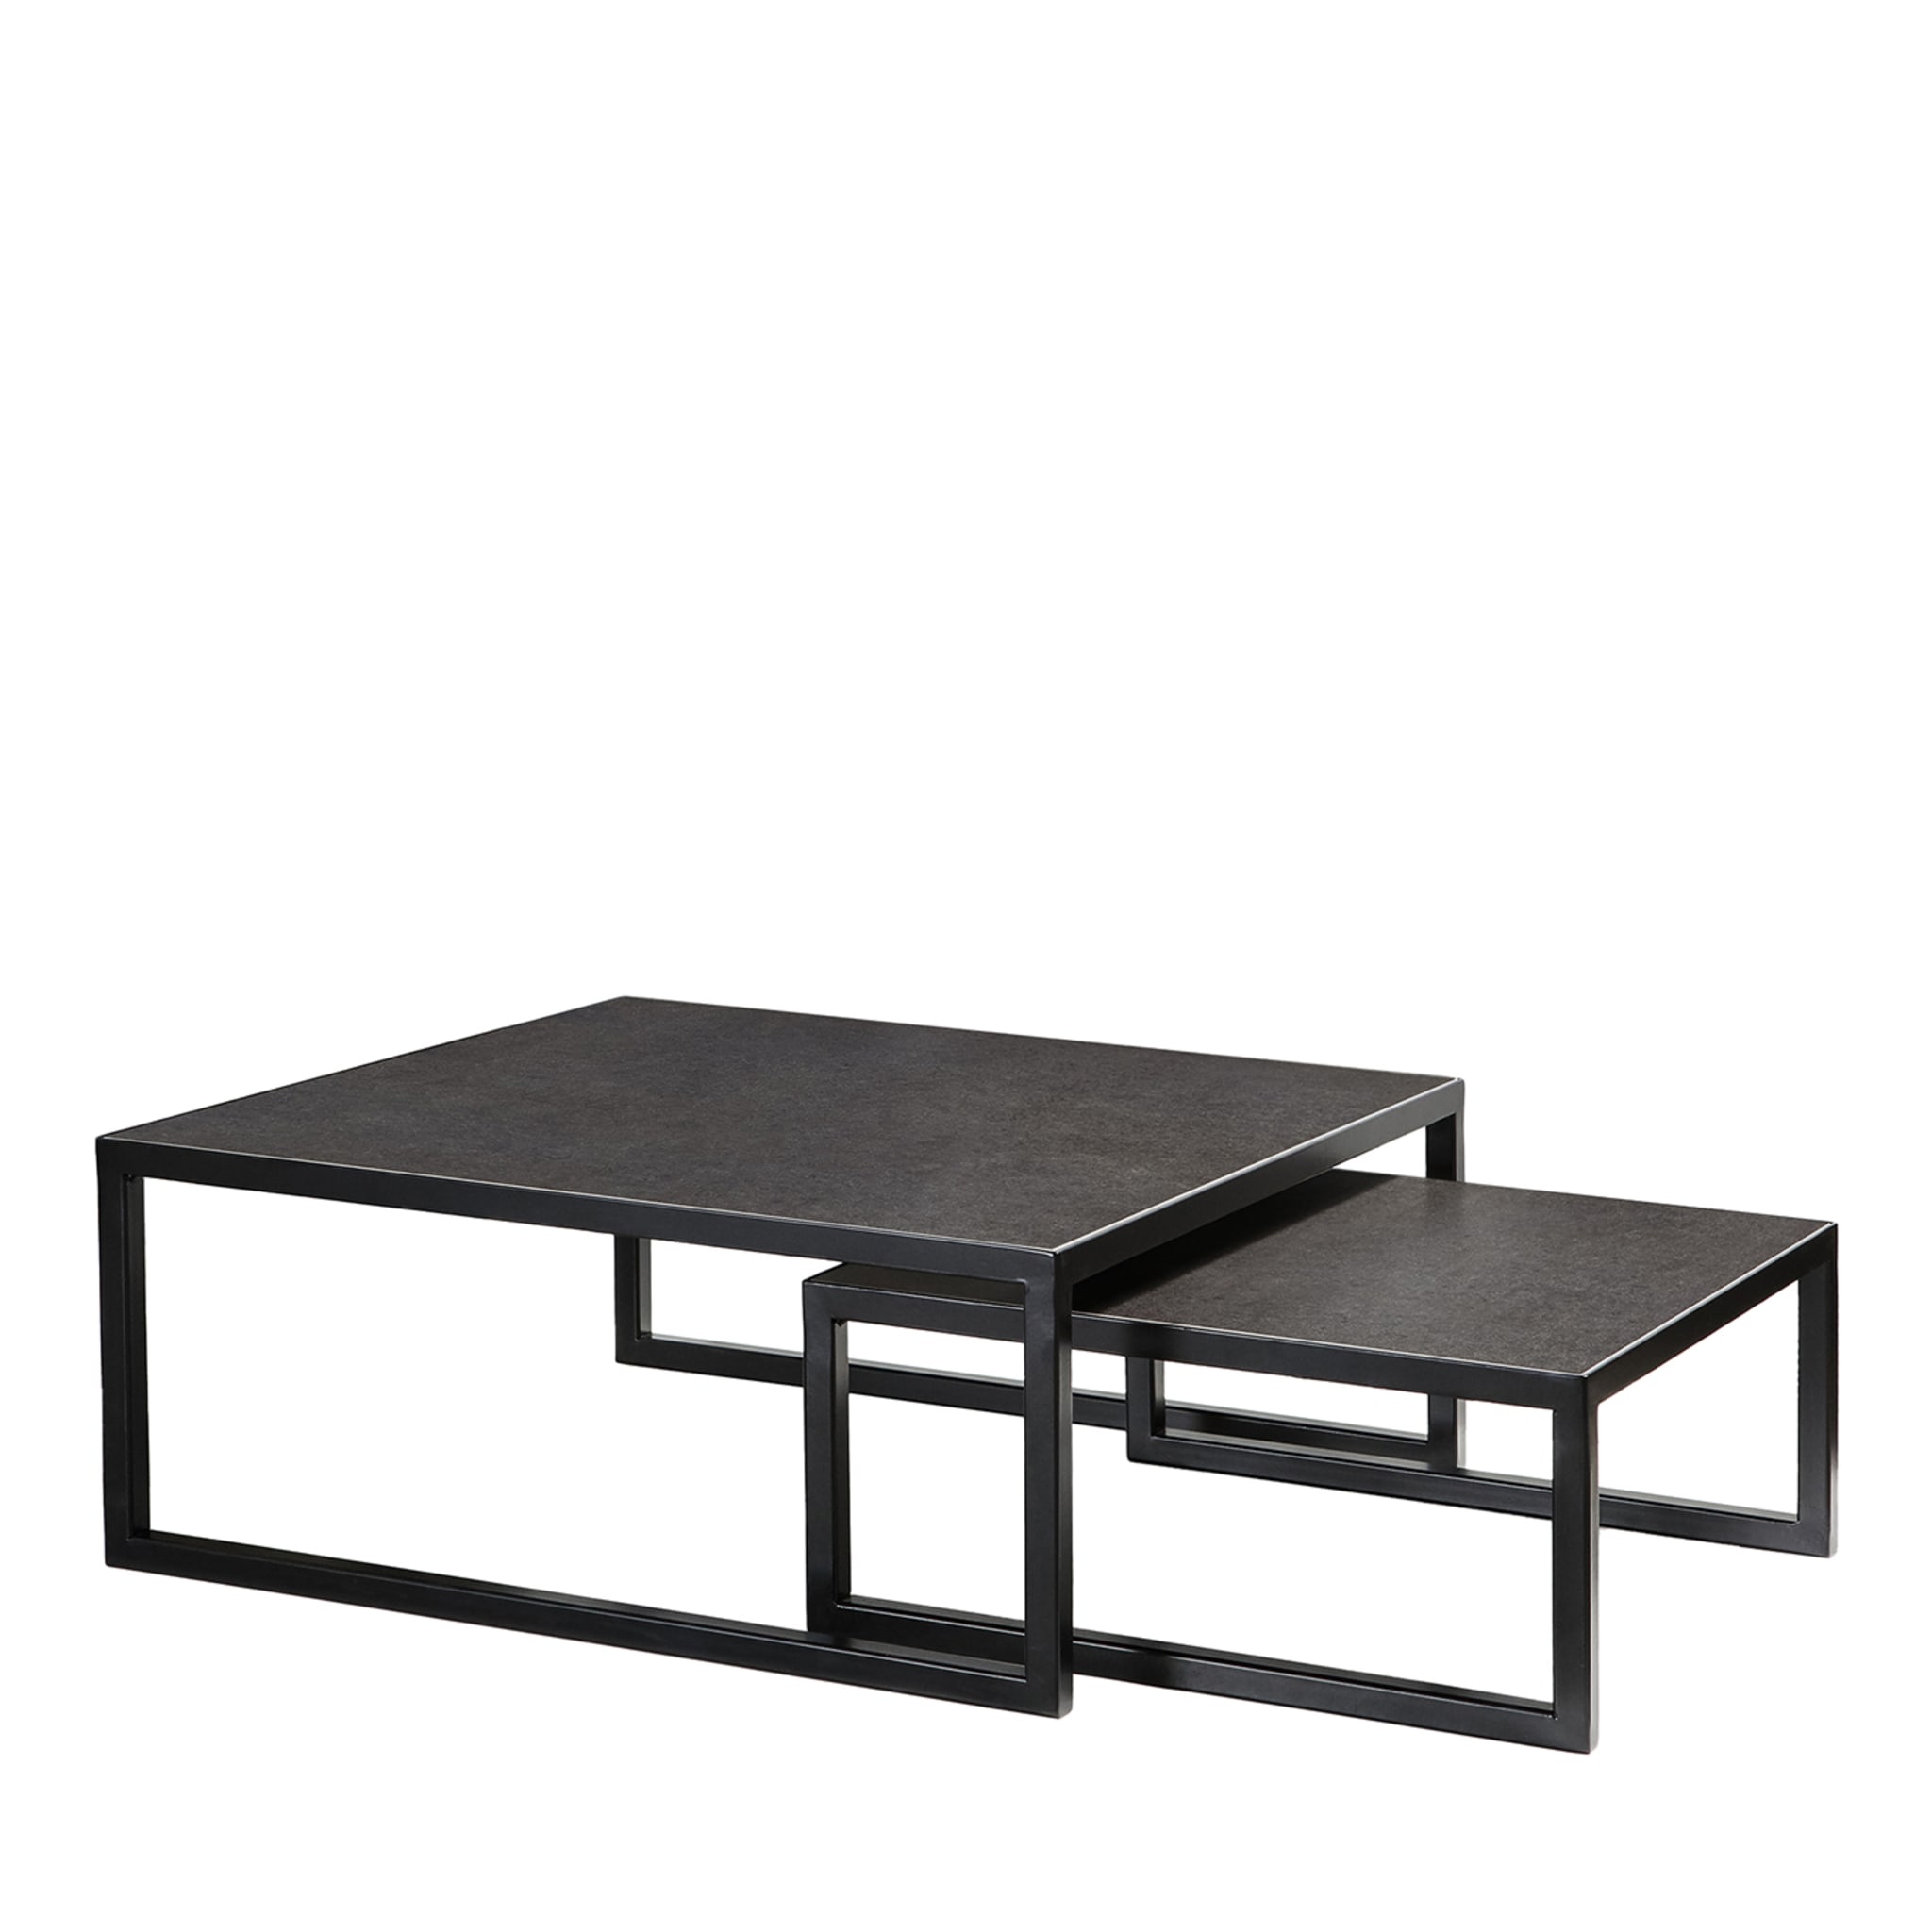 Set of 2 Regolo Coffee Tables #1 - Main view